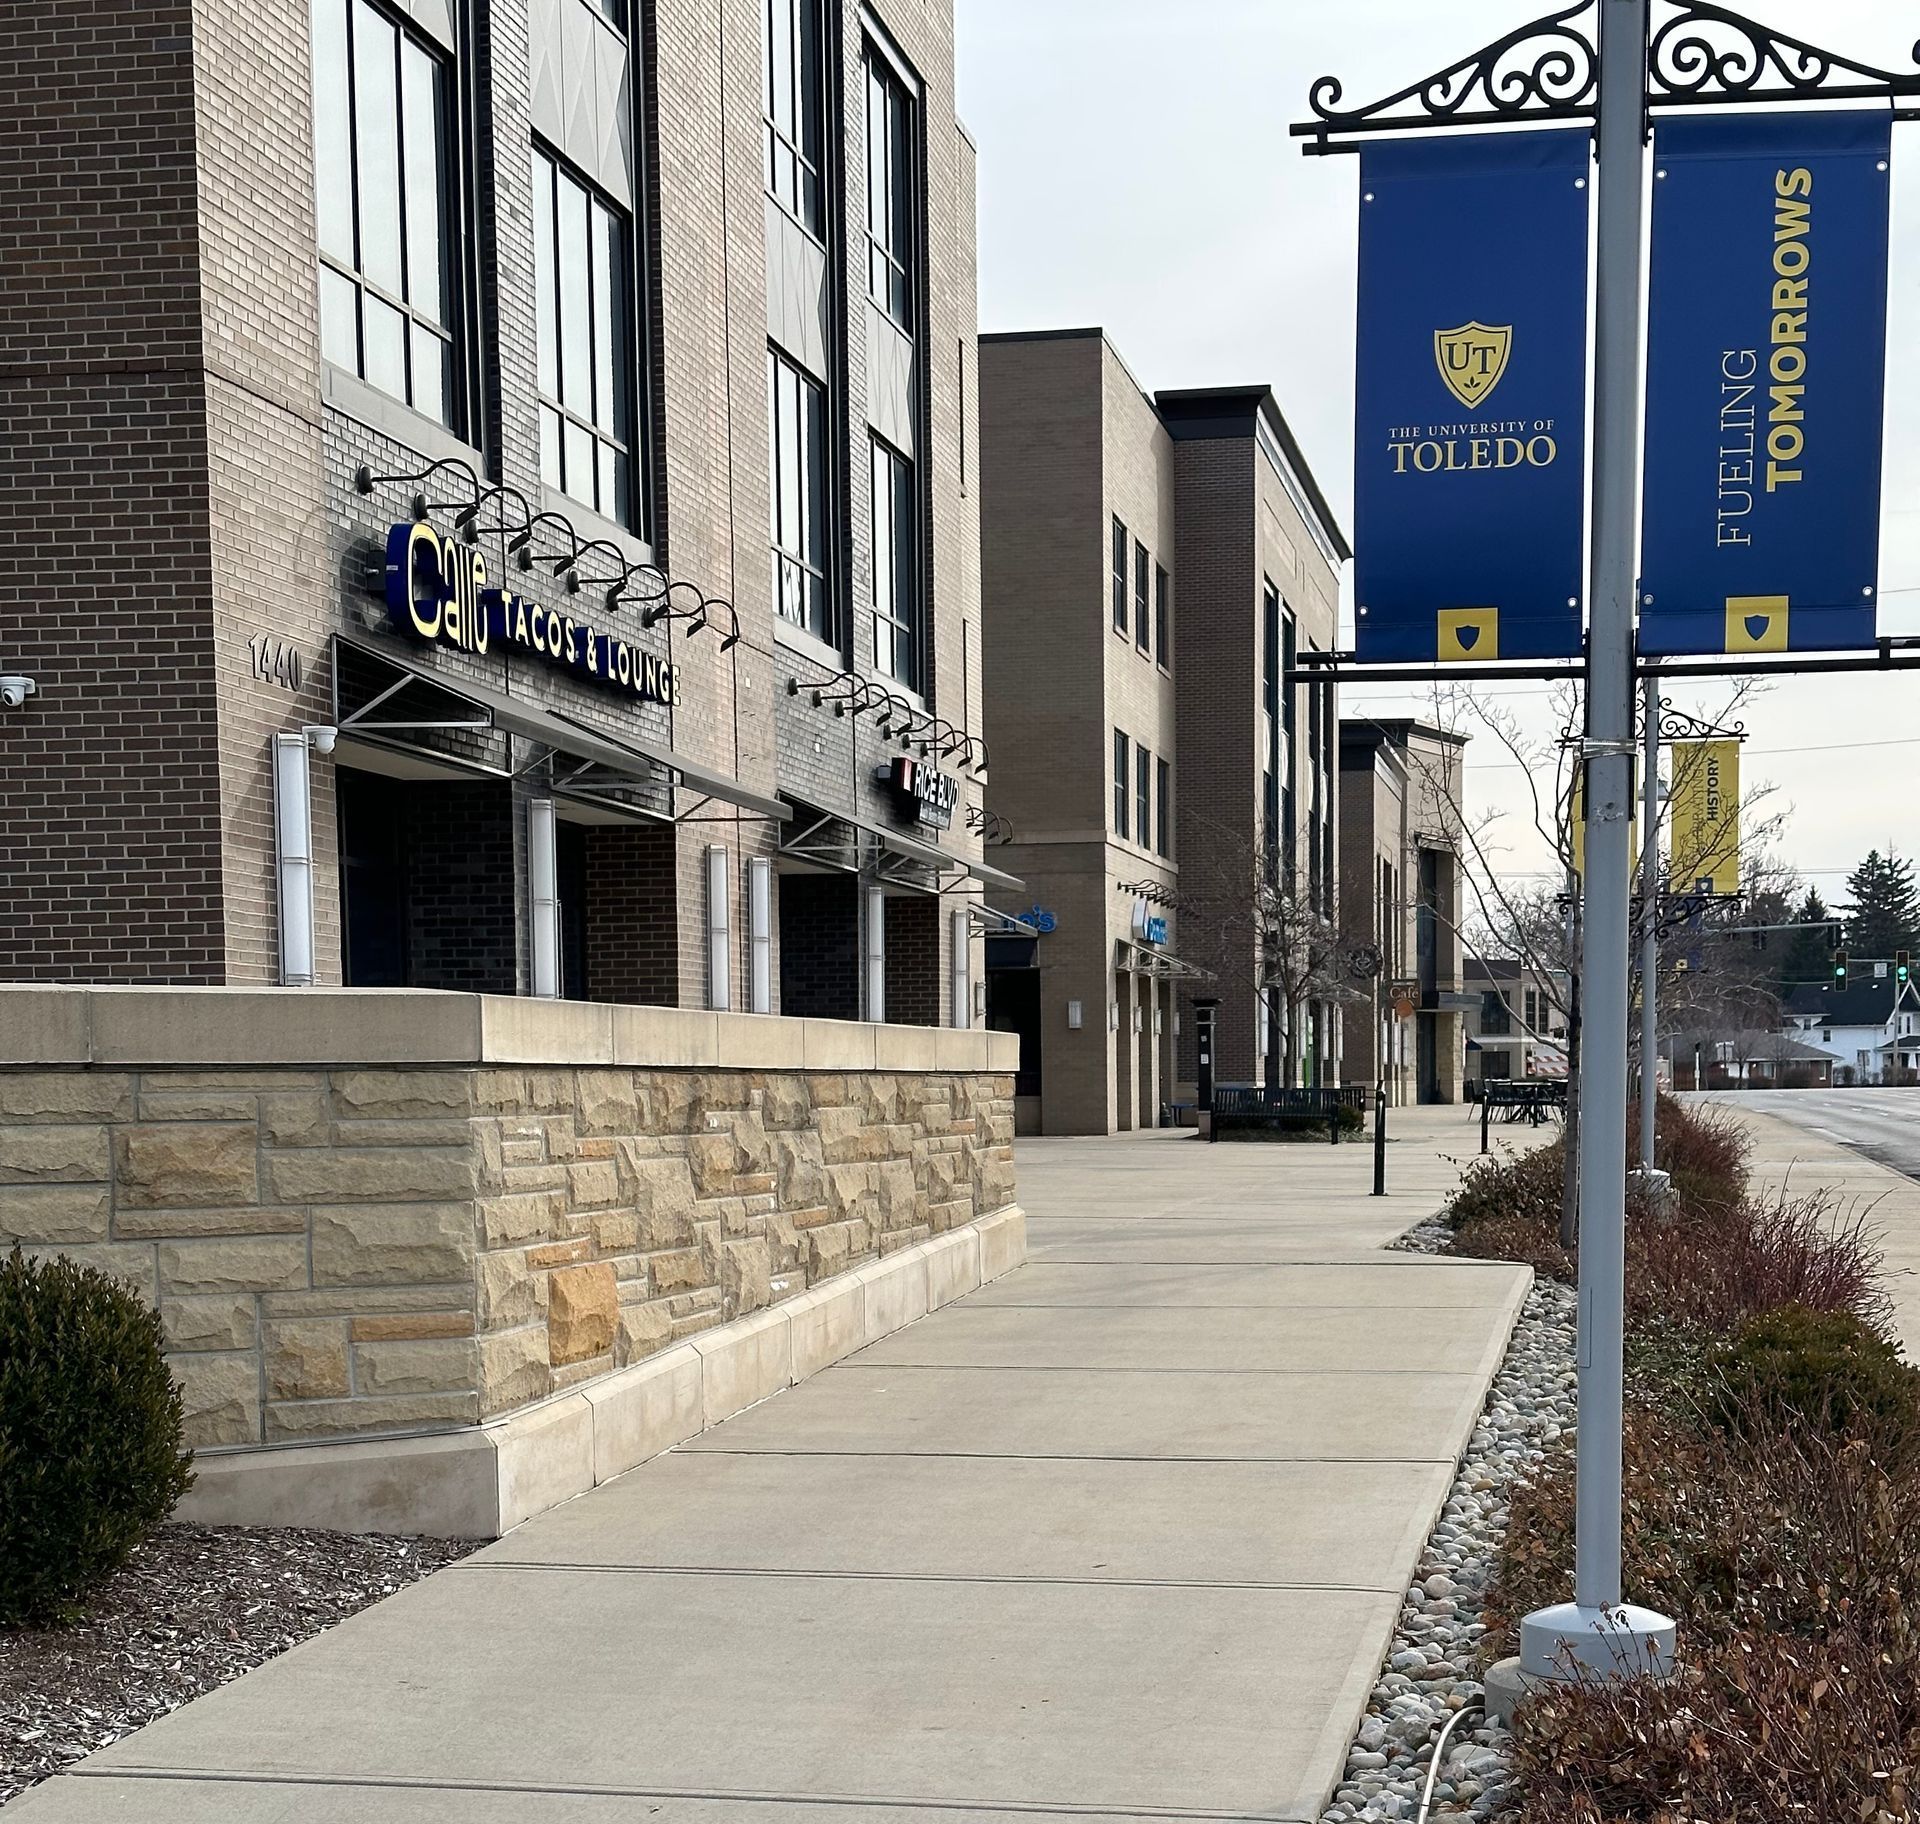 The University Gateway is a short walk from Campus View Apartments.